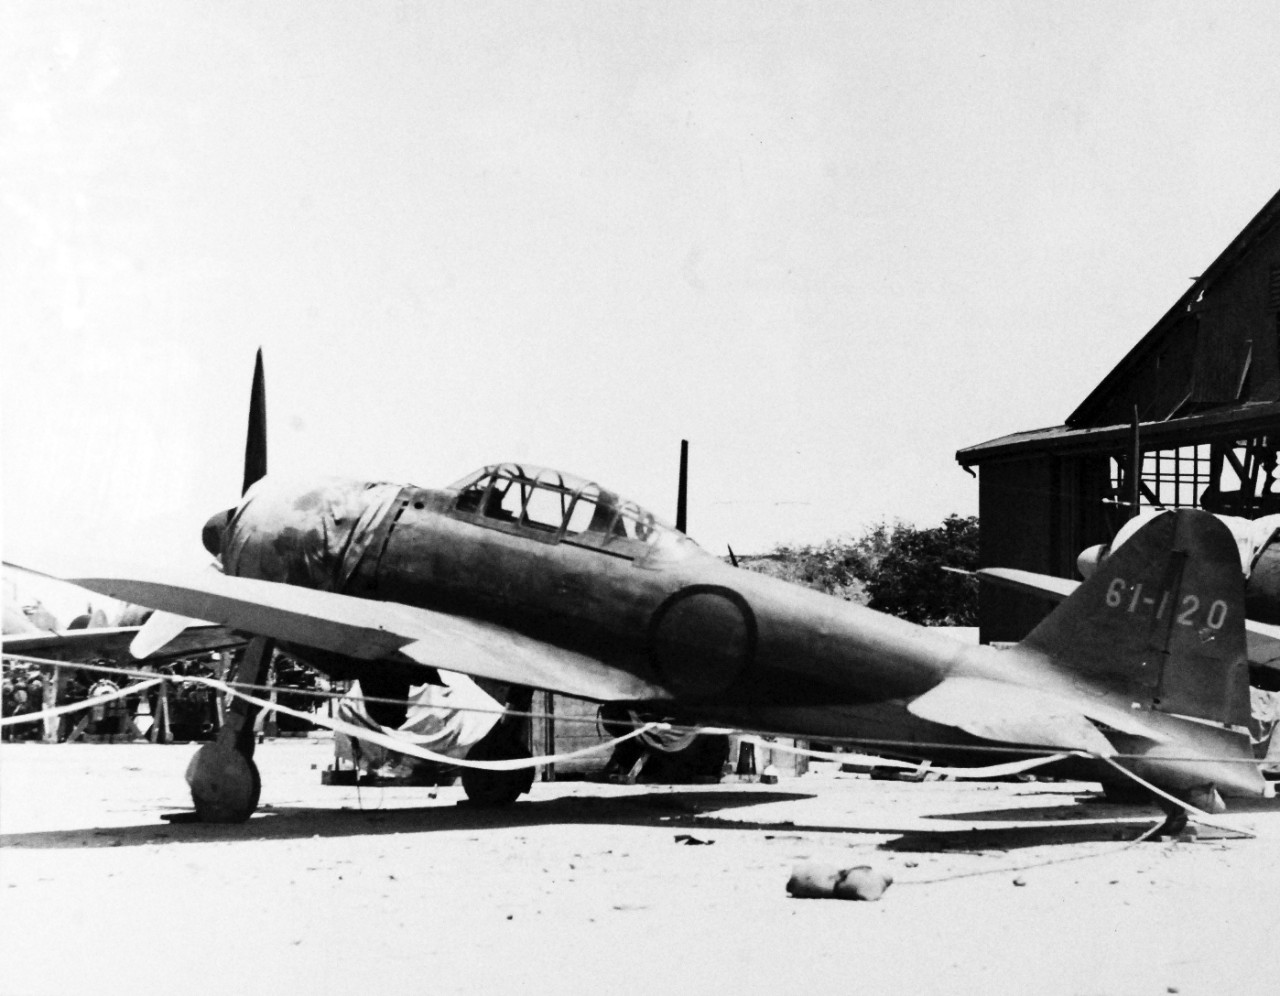 80-G-287159:   Invasion of Saipan, June-July 1944.   Japanese Mitsubishi A6M "Zero" aircraft on Aslito airfield, Saipan, destroyed on the ground by U.S. Aerial bombing, Japanese Zero’s and hangars, July 8, 1944.     Photographed by USS Indianapolis (CA 35) photographer.   Official U.S. Navy photograph, now in the collections of the National Archives.  (2017/03/21).  